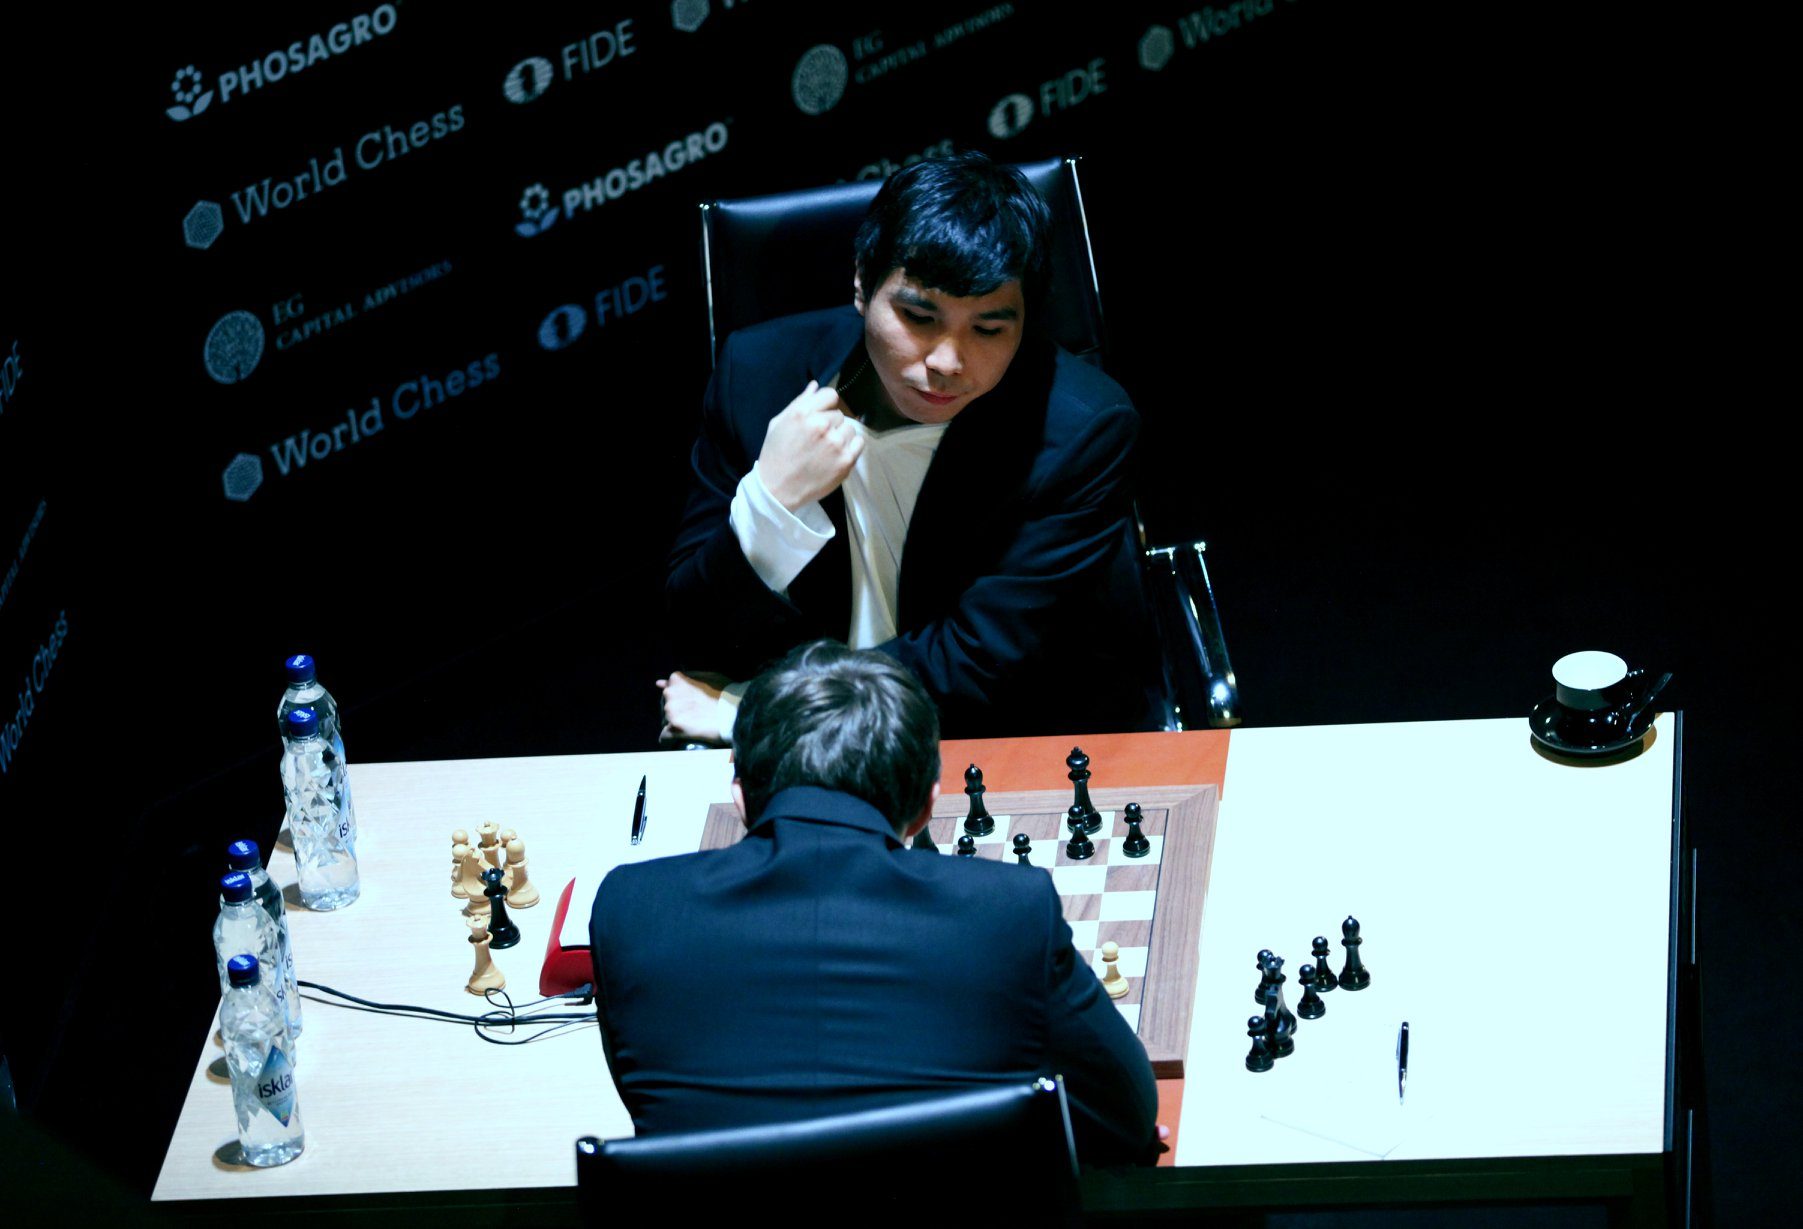 Round 7 loss all but eliminates Wesley So in Candidates Tournament